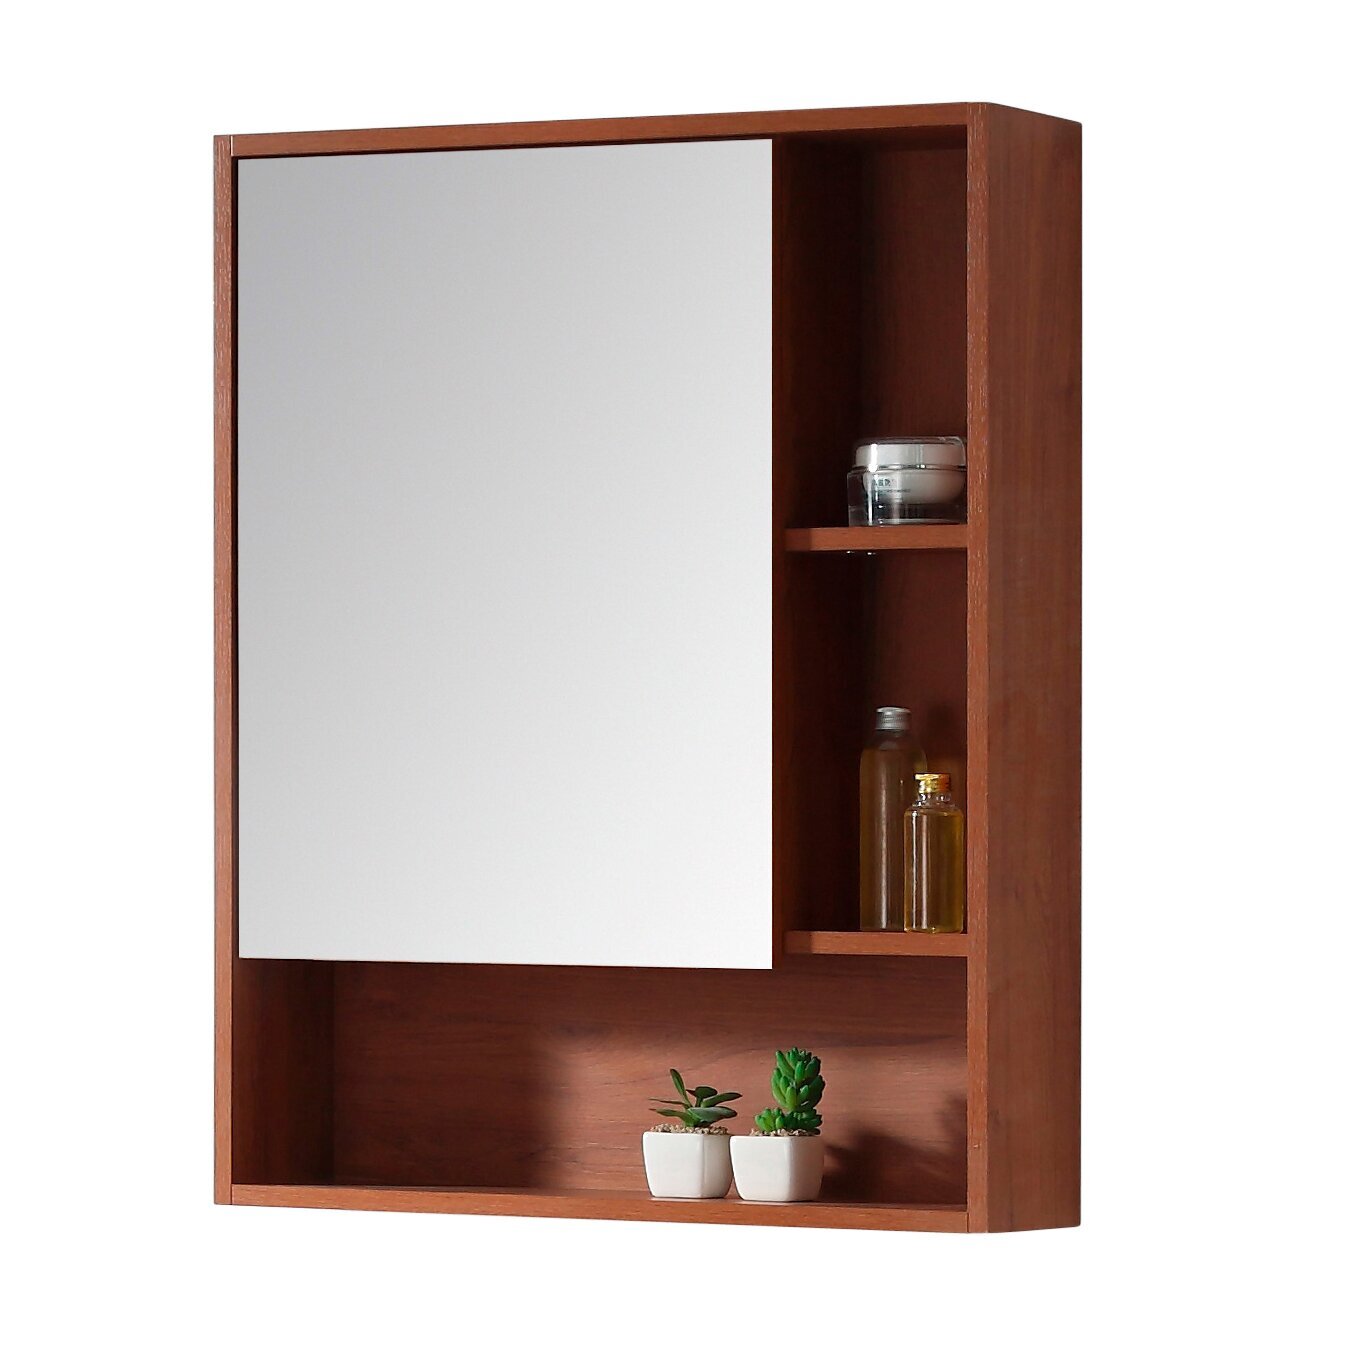 Unique Bathroom Wall Cabinets with Attached Open Shelves